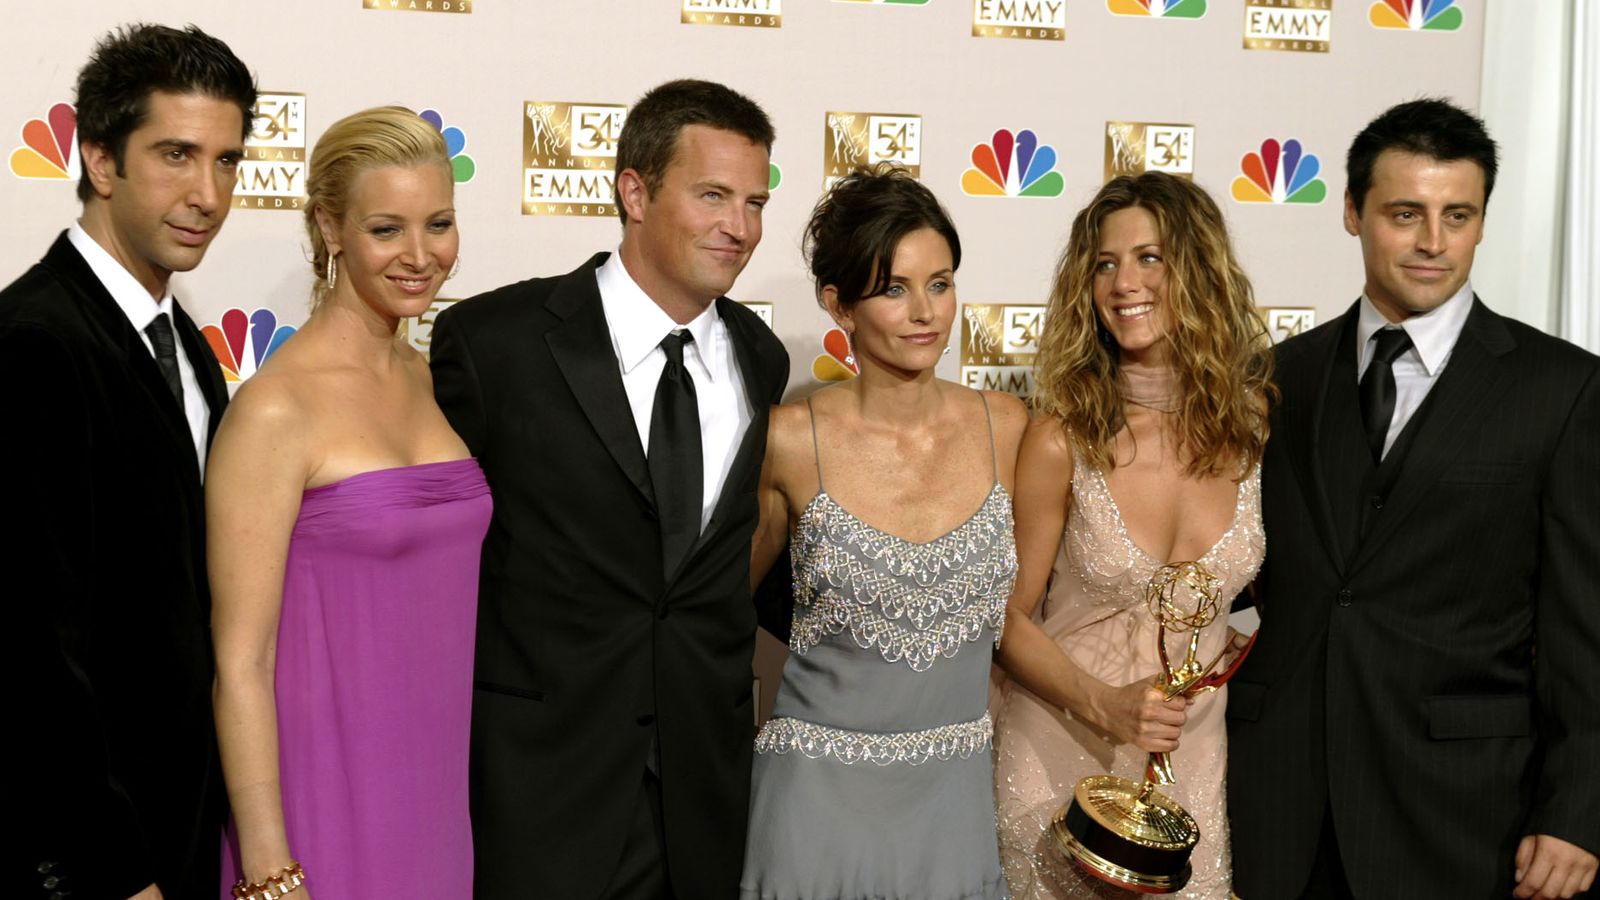 Friends Cast Set to Begin Filming HBO Max Reunion Special Next Week